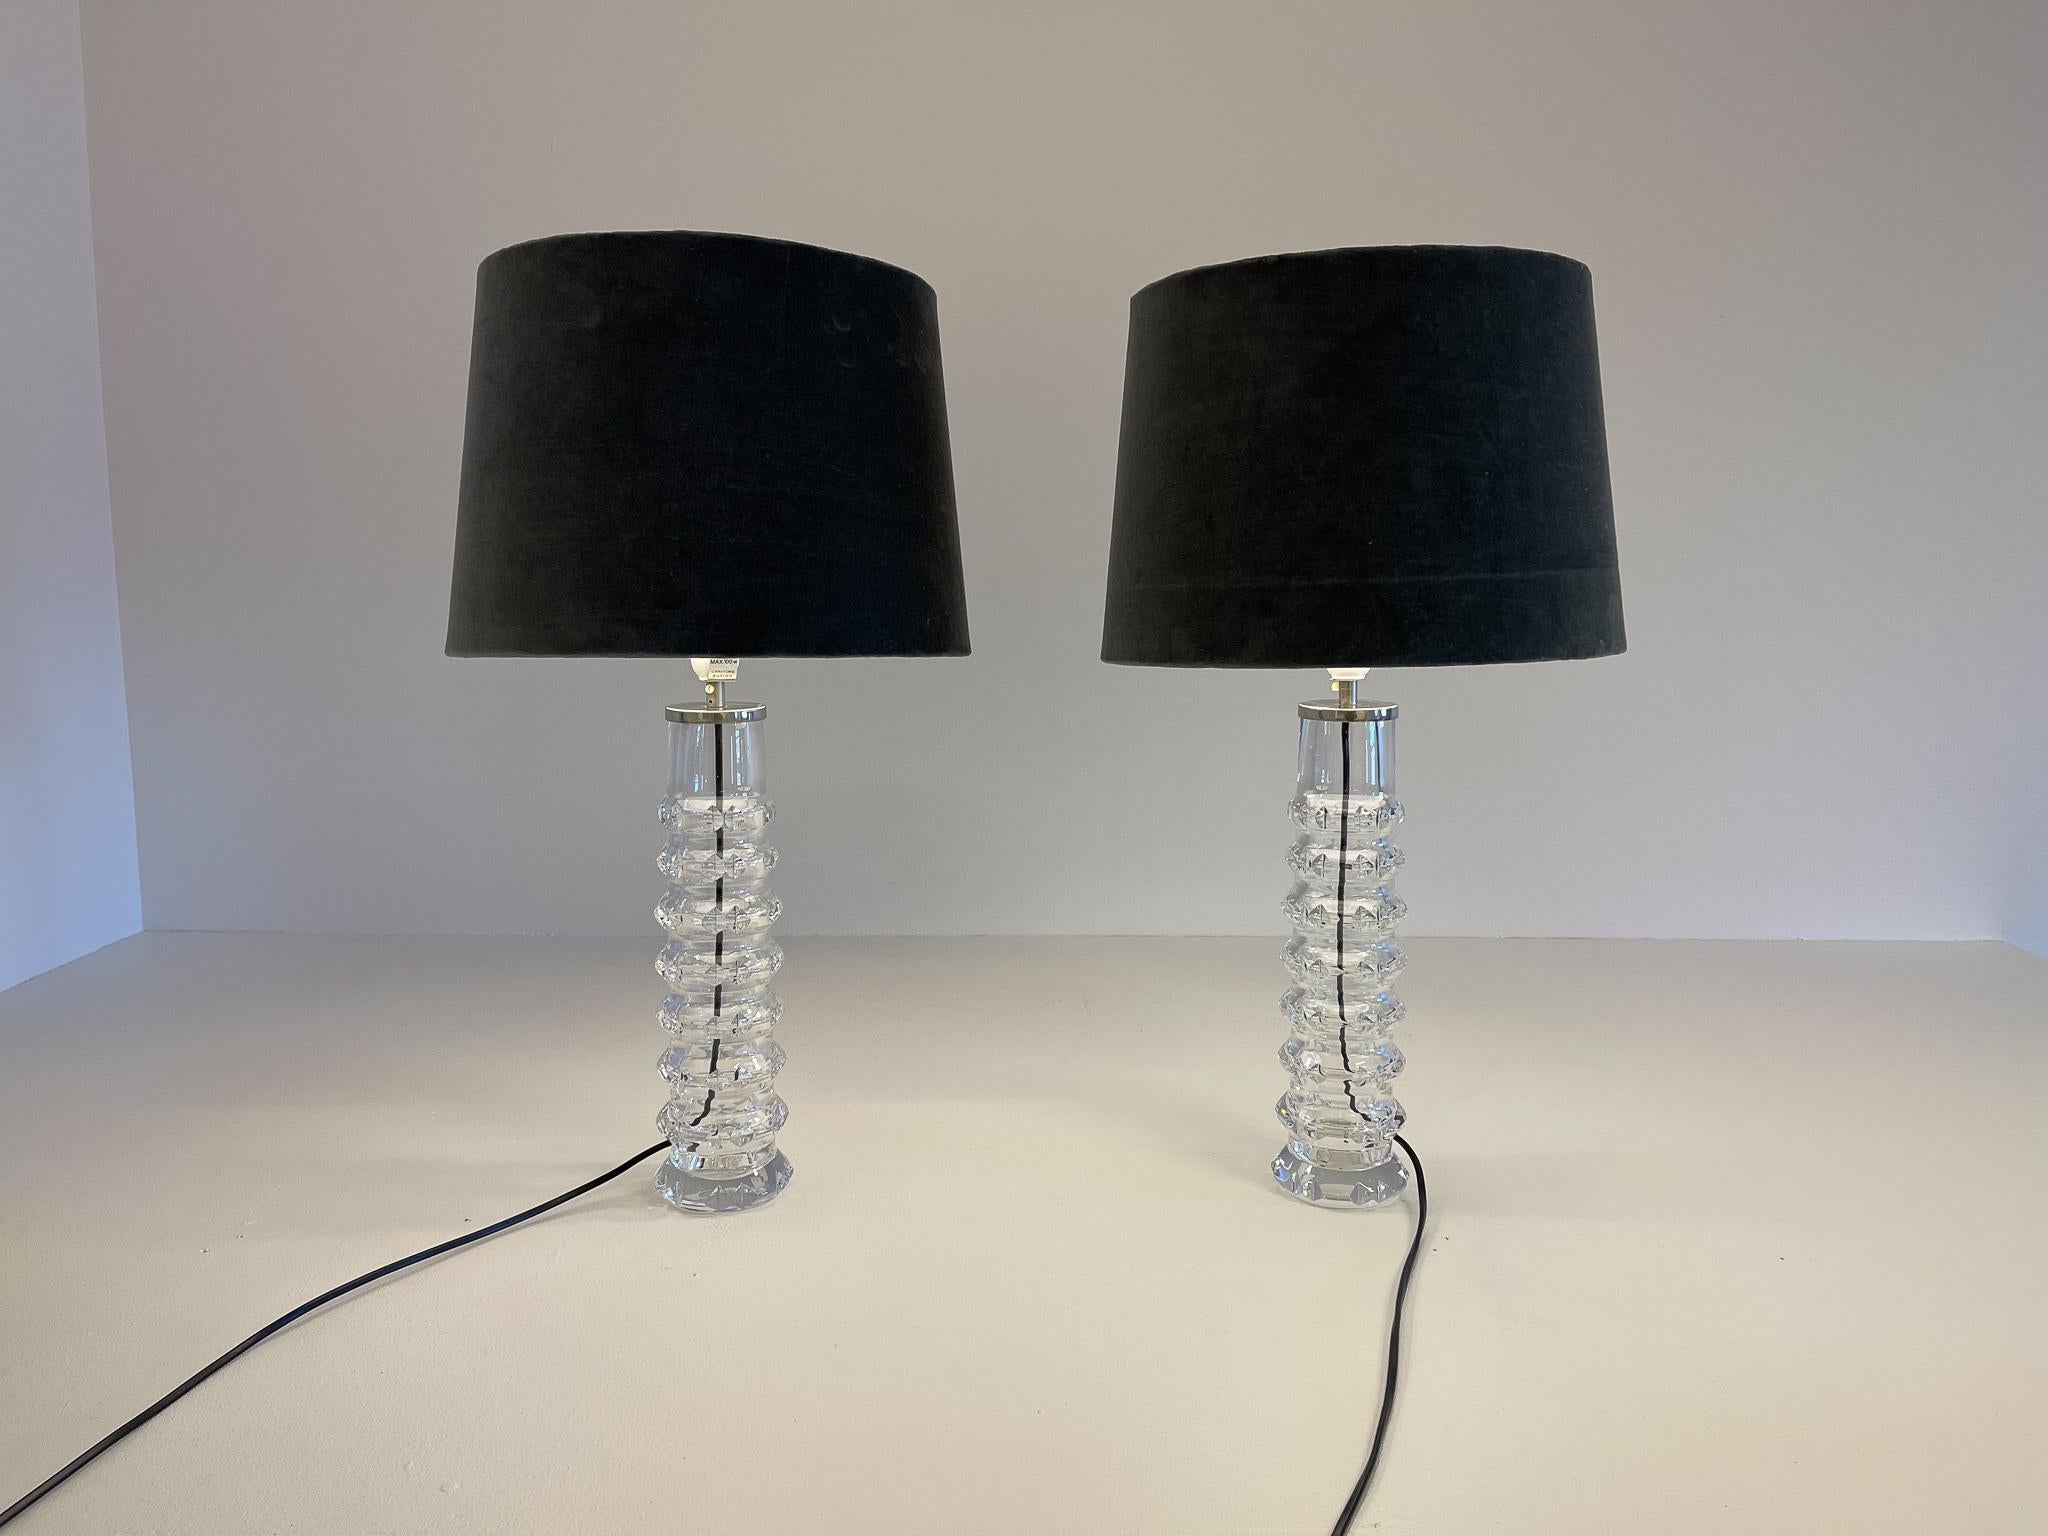 Midcentury Pair of Crystal Lamps by Carl Fagerlund for Orrefors Sweden, 1970s For Sale 4